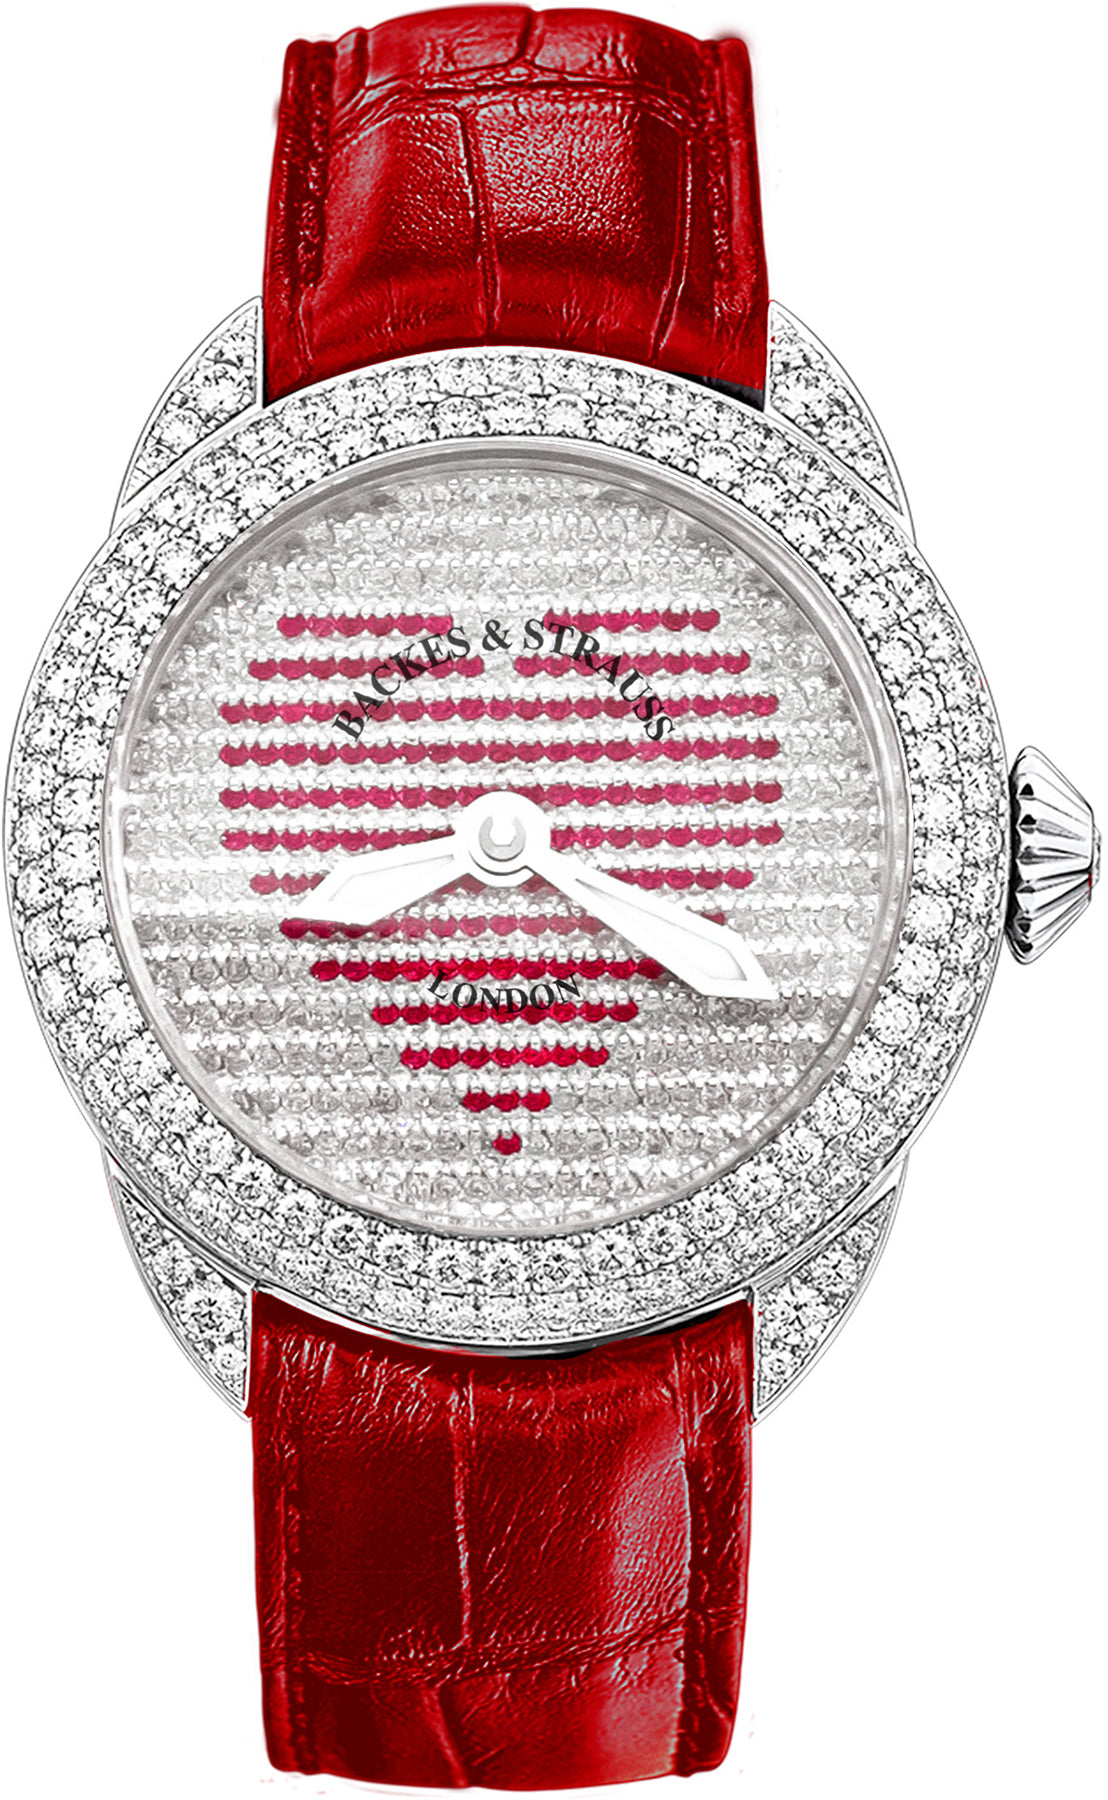 BackesandStrauss Watch Piccadilly Mystery Red Heart 37 Limited Edition